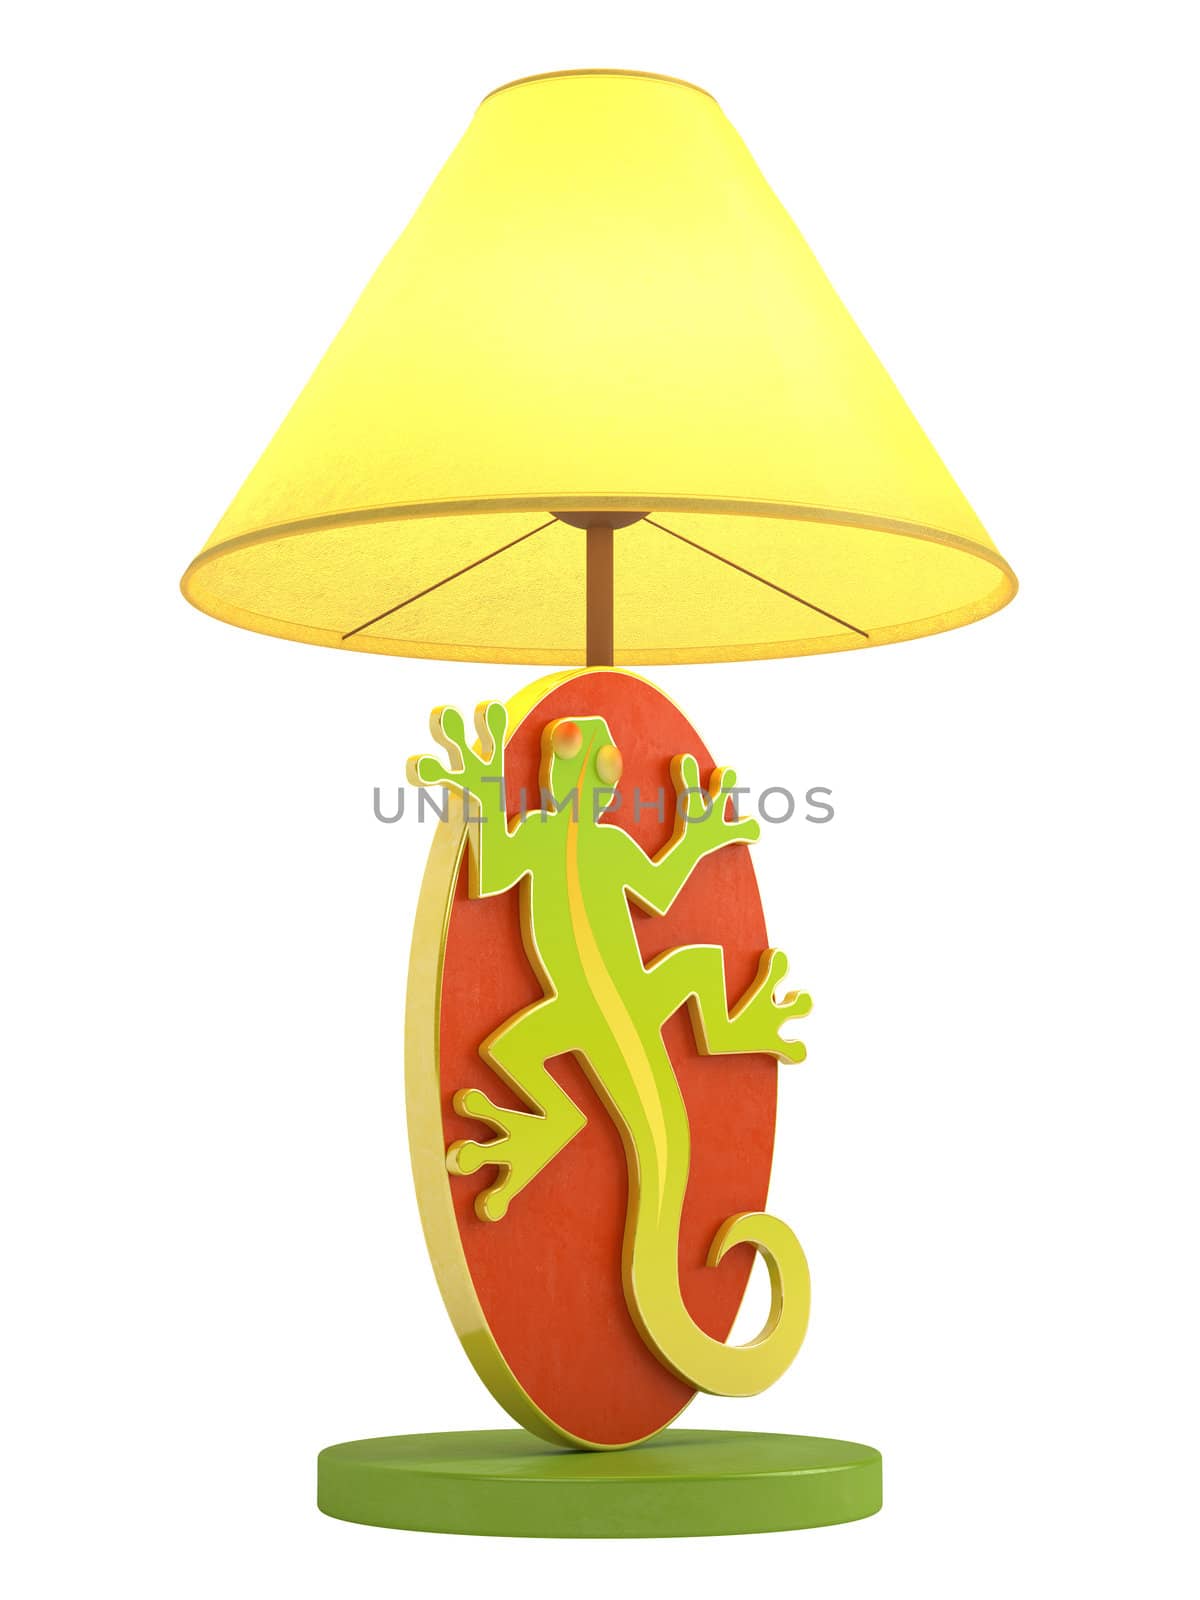 Modern colourful wooden lamp with an oval base with a lizard cutout and a cheerful yellow lampshade isolated on white